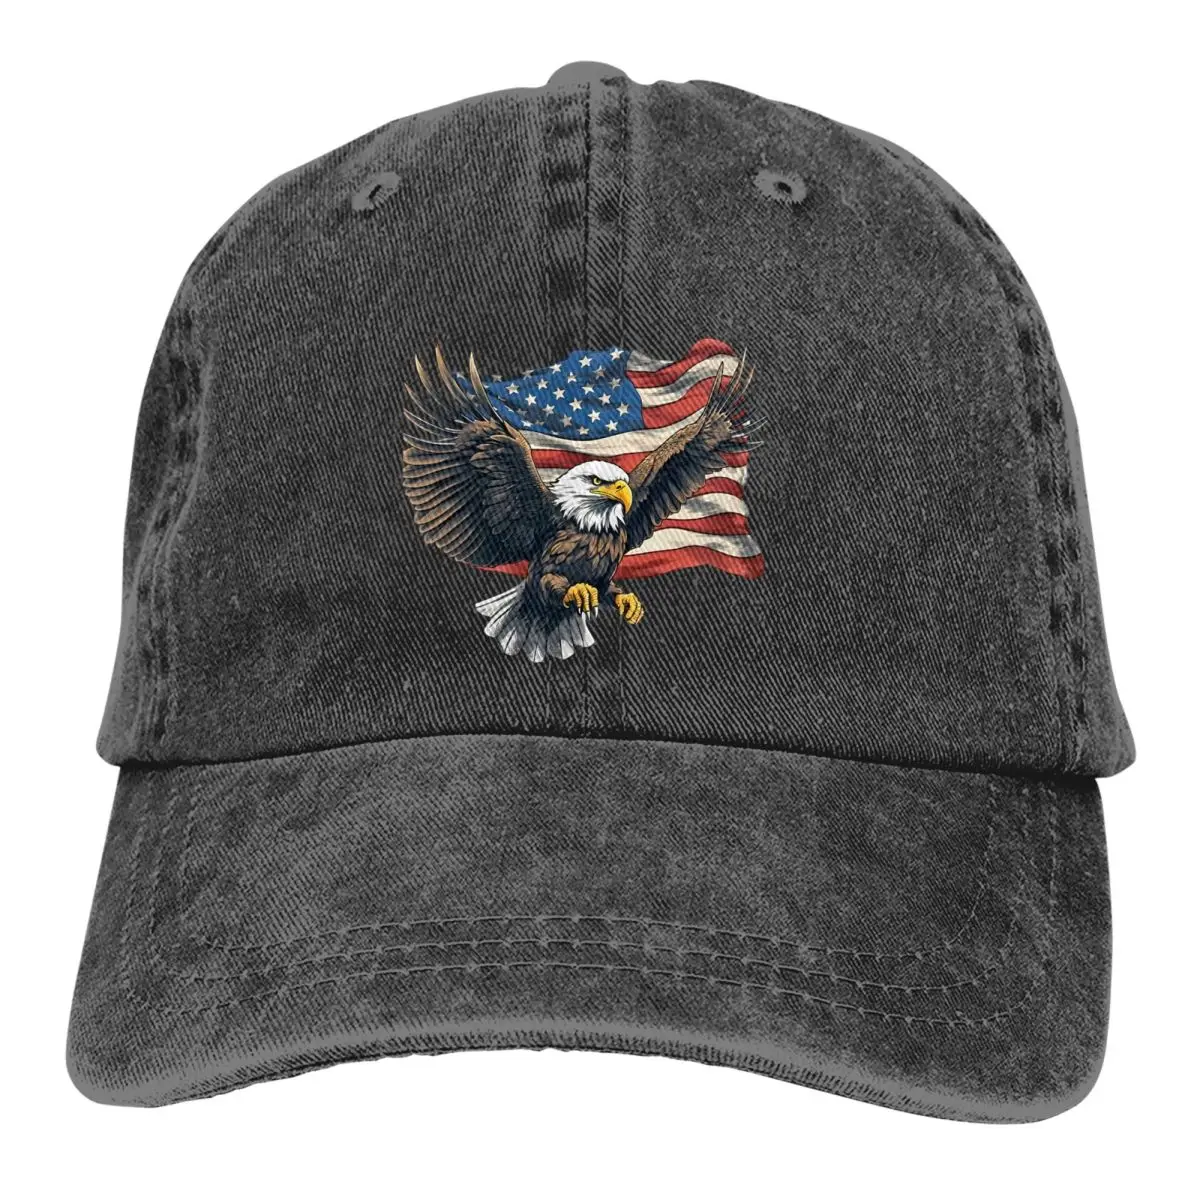 

American Eagle Multicolor Hat Peaked Women's Cap Soar Personalized Visor Protection Hats